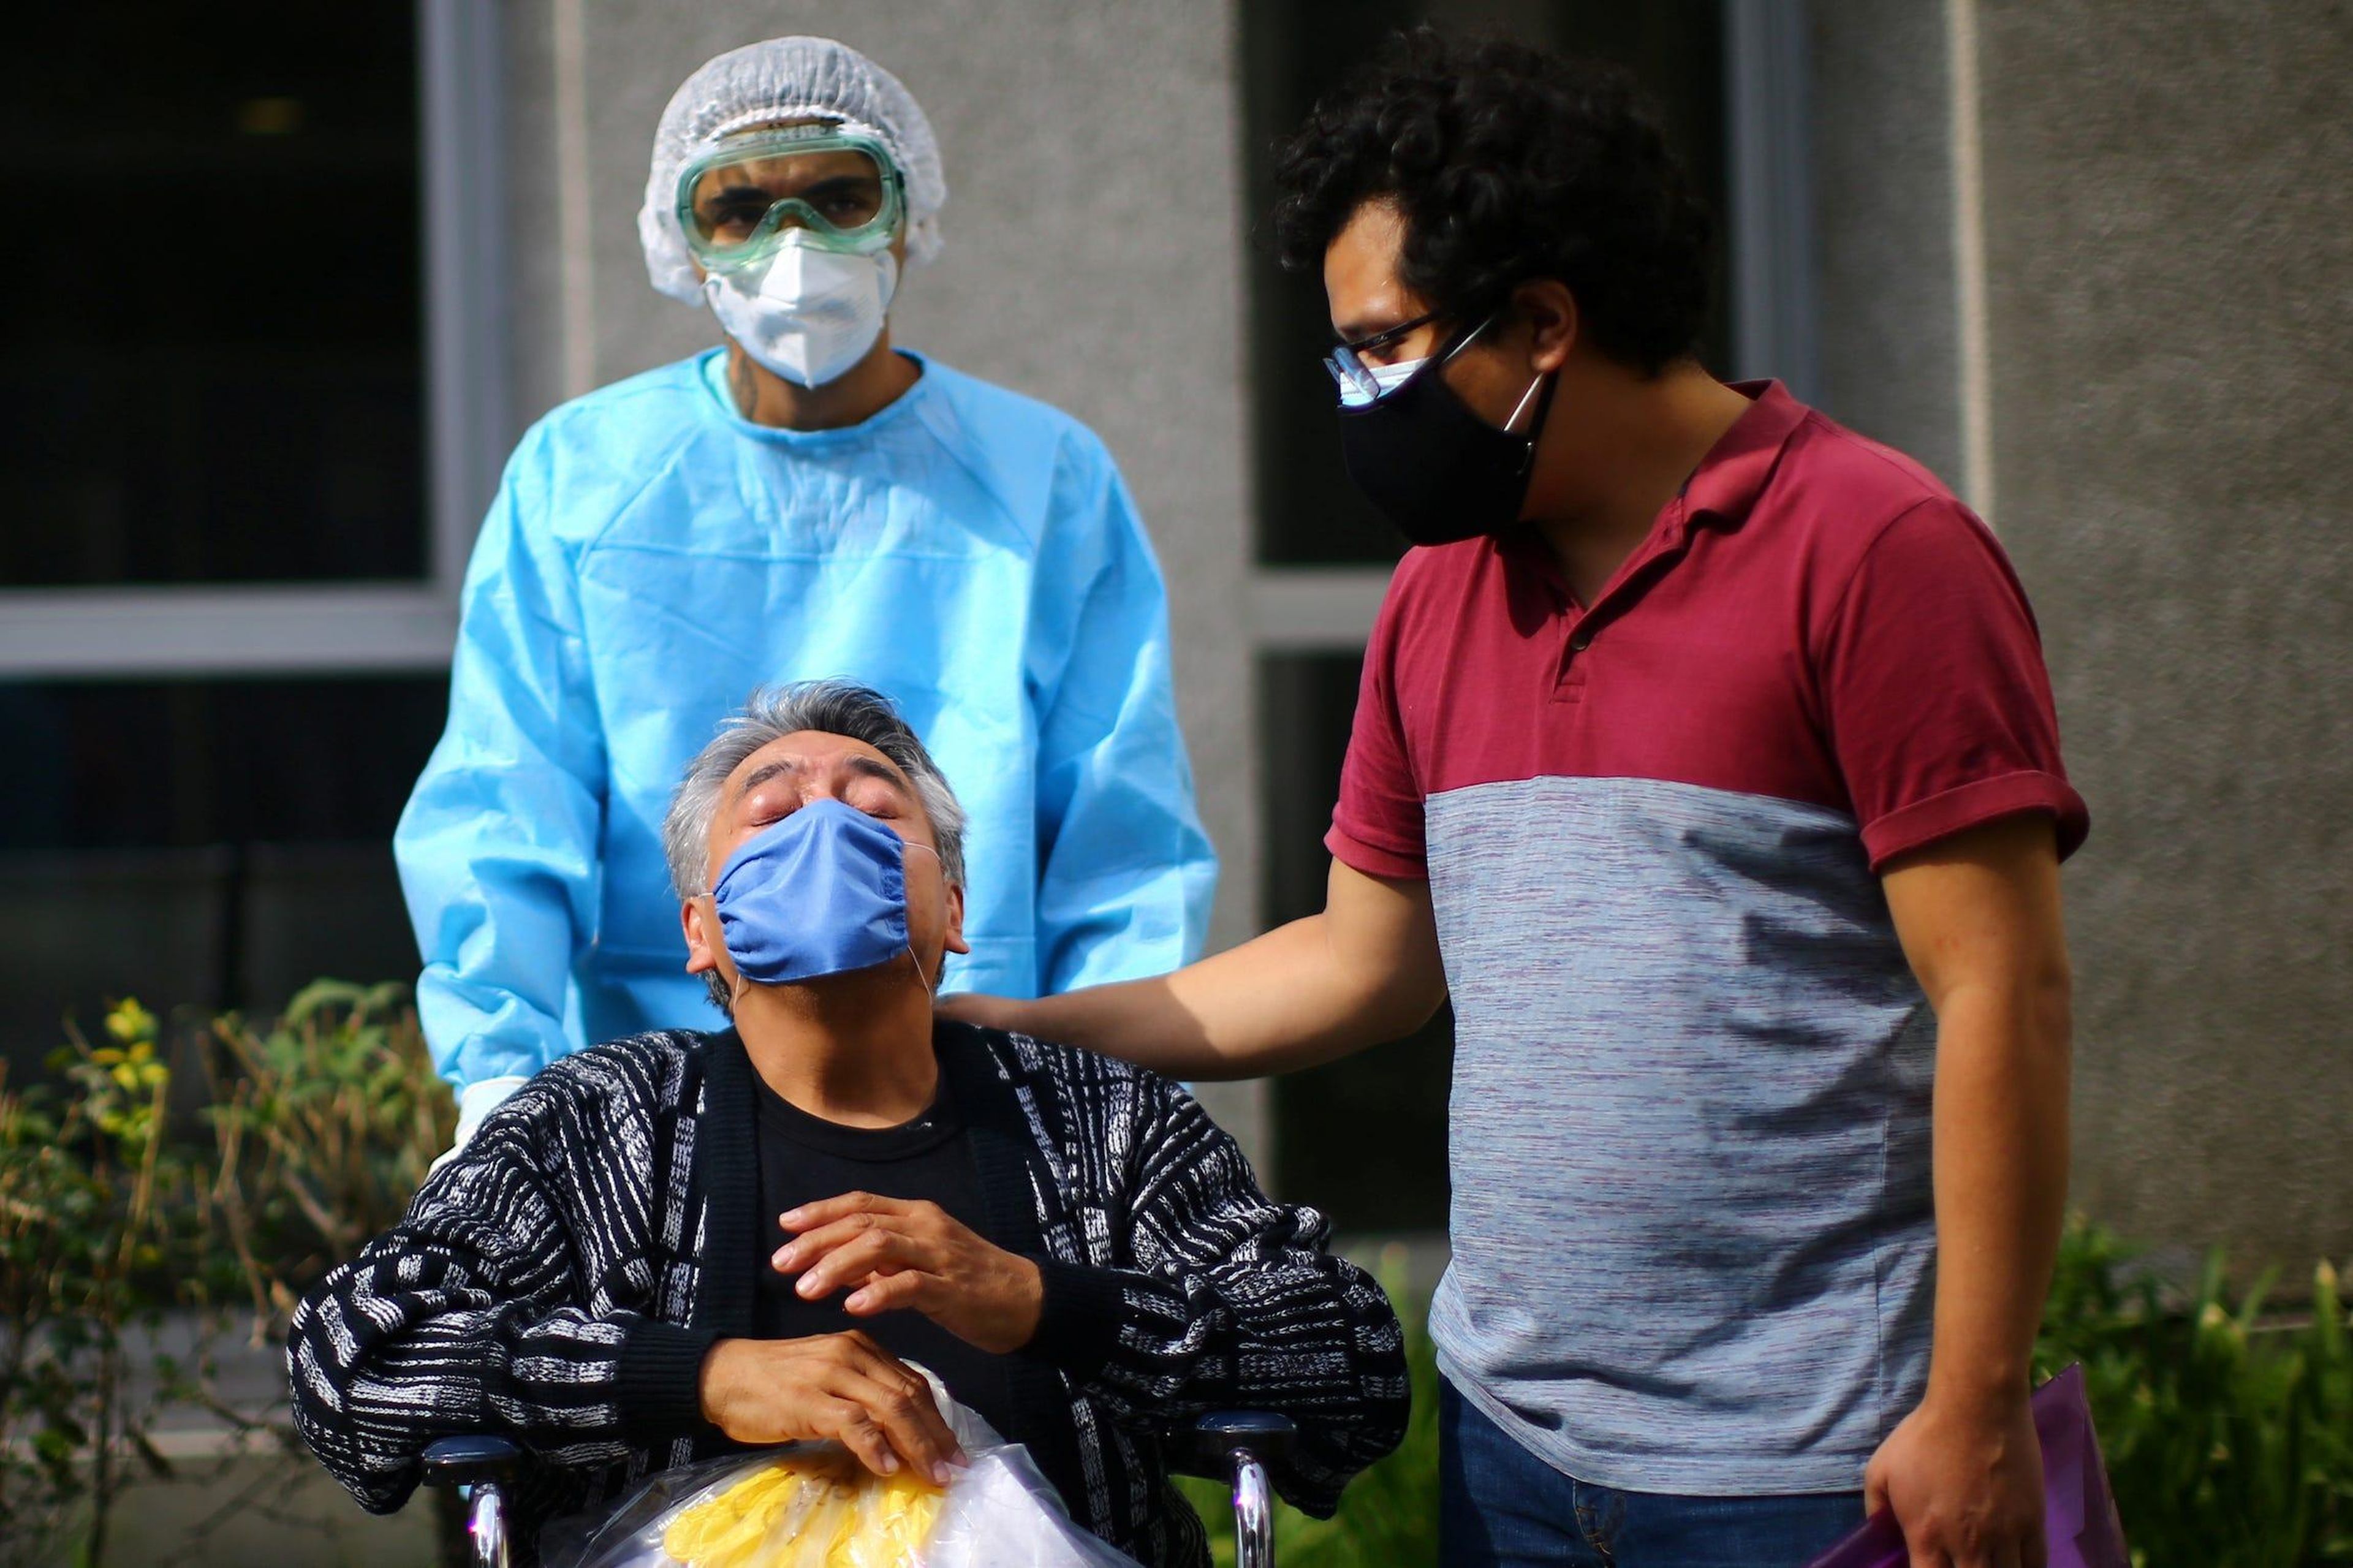 Rufino, a patient who has recovered from the coronavirus disease (COVID-19), gestures next to his son as he leaves from the Juarez Hospital to go to his house in Mexico City, Mexico, July 27, 2020. Edgard Garrido/Reuters